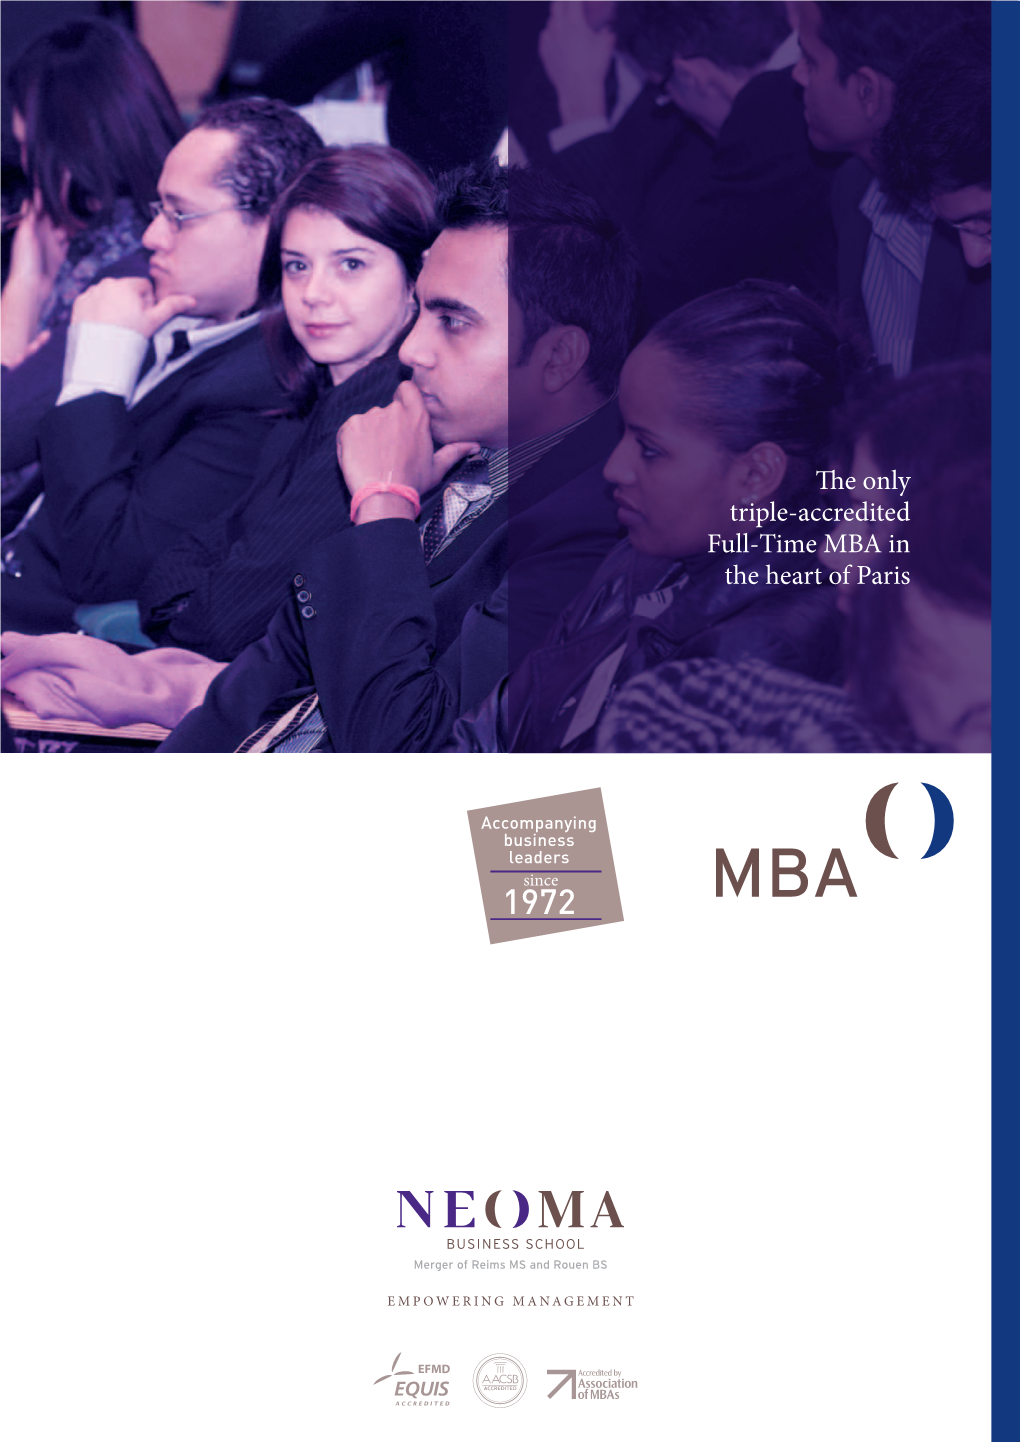 The Only Triple-Accredited Full-Time MBA in the Heart of Paris